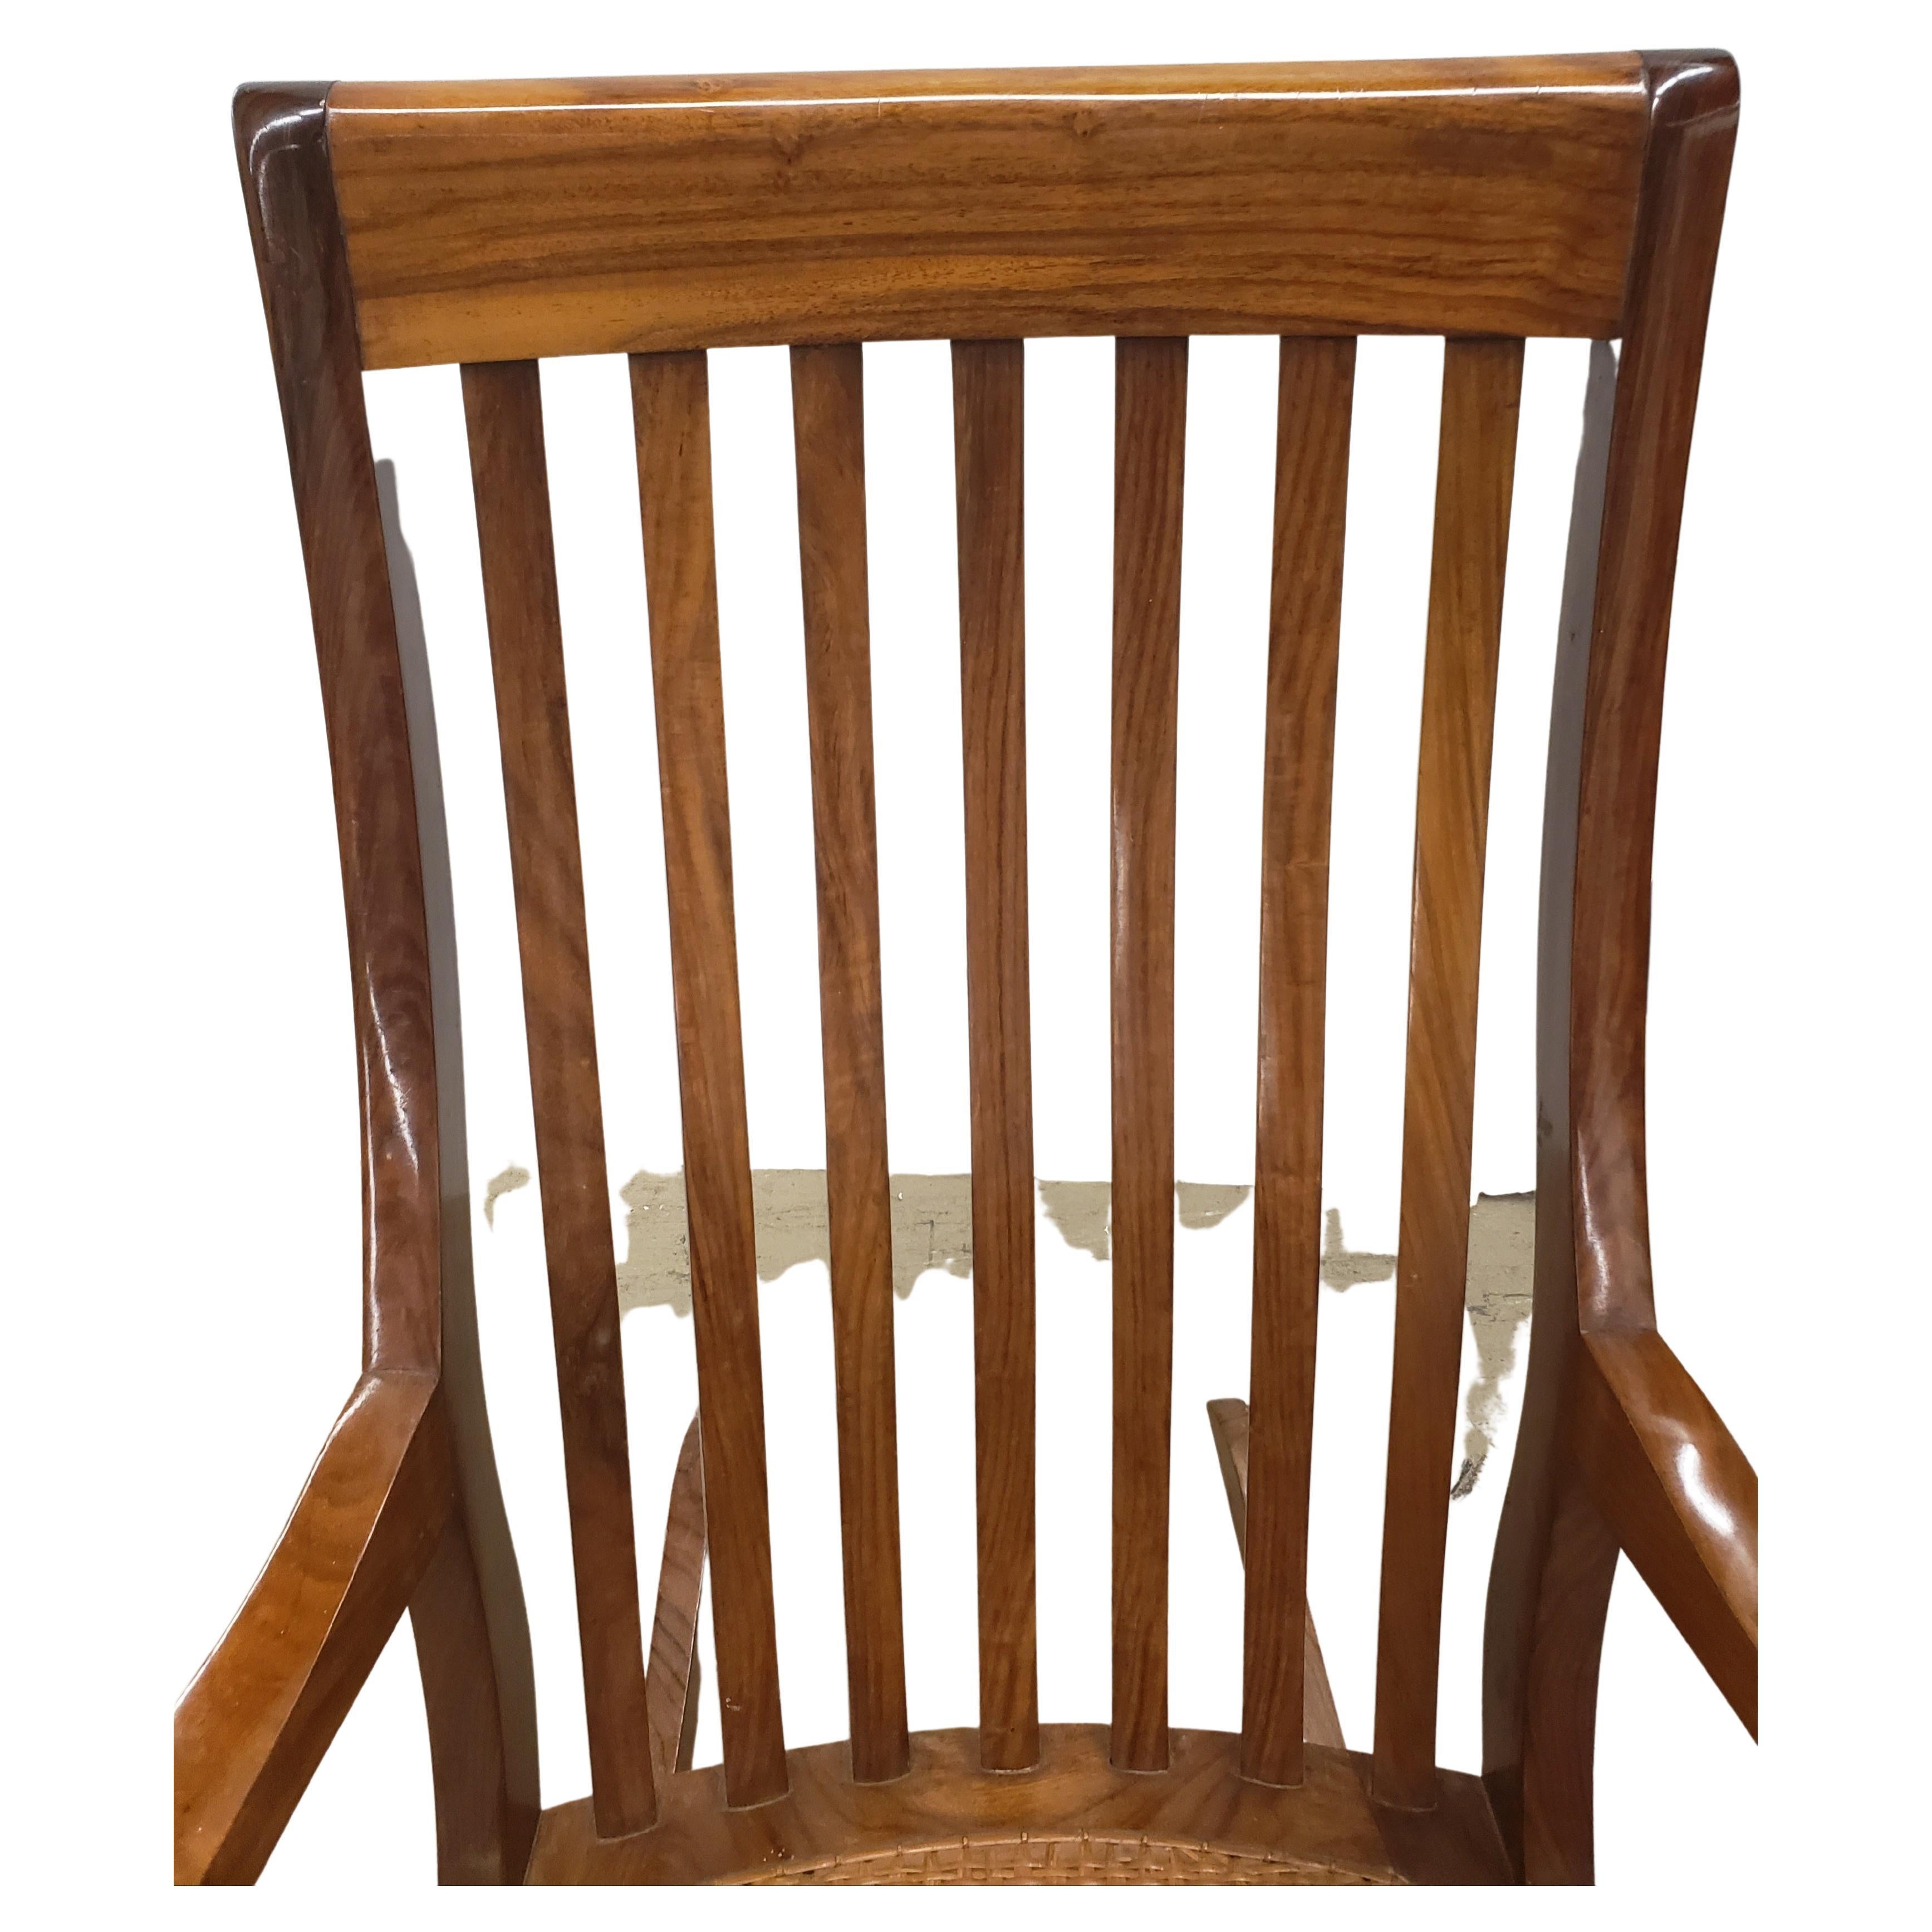 20th Century M. Hayat & Brothers Anglo-Indian Hardwood Woven Wicker Seat Rocking Chair For Sale